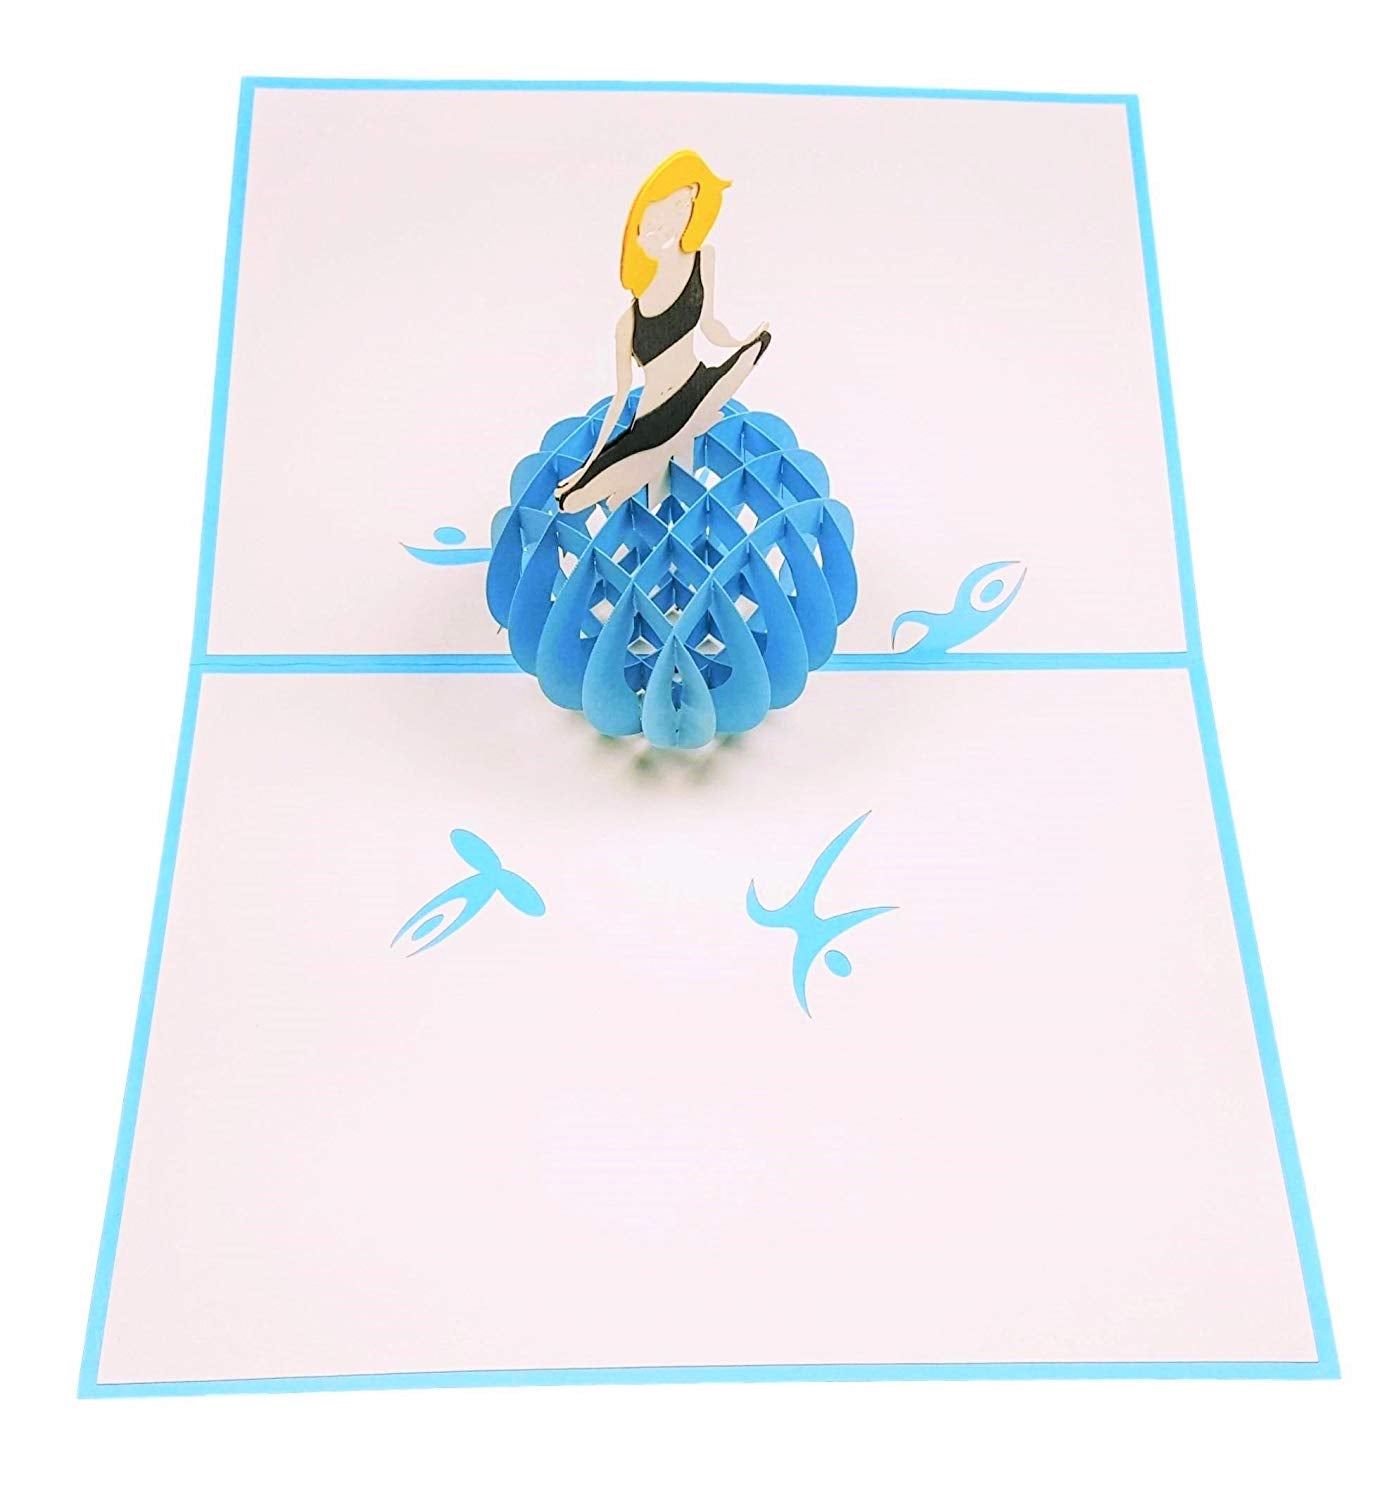 Cute Yoga Lady 3D Pop Up Greeting Card - Birthday - Fitness - Fun - Just Because - Thinking Of You - iGifts And Cards